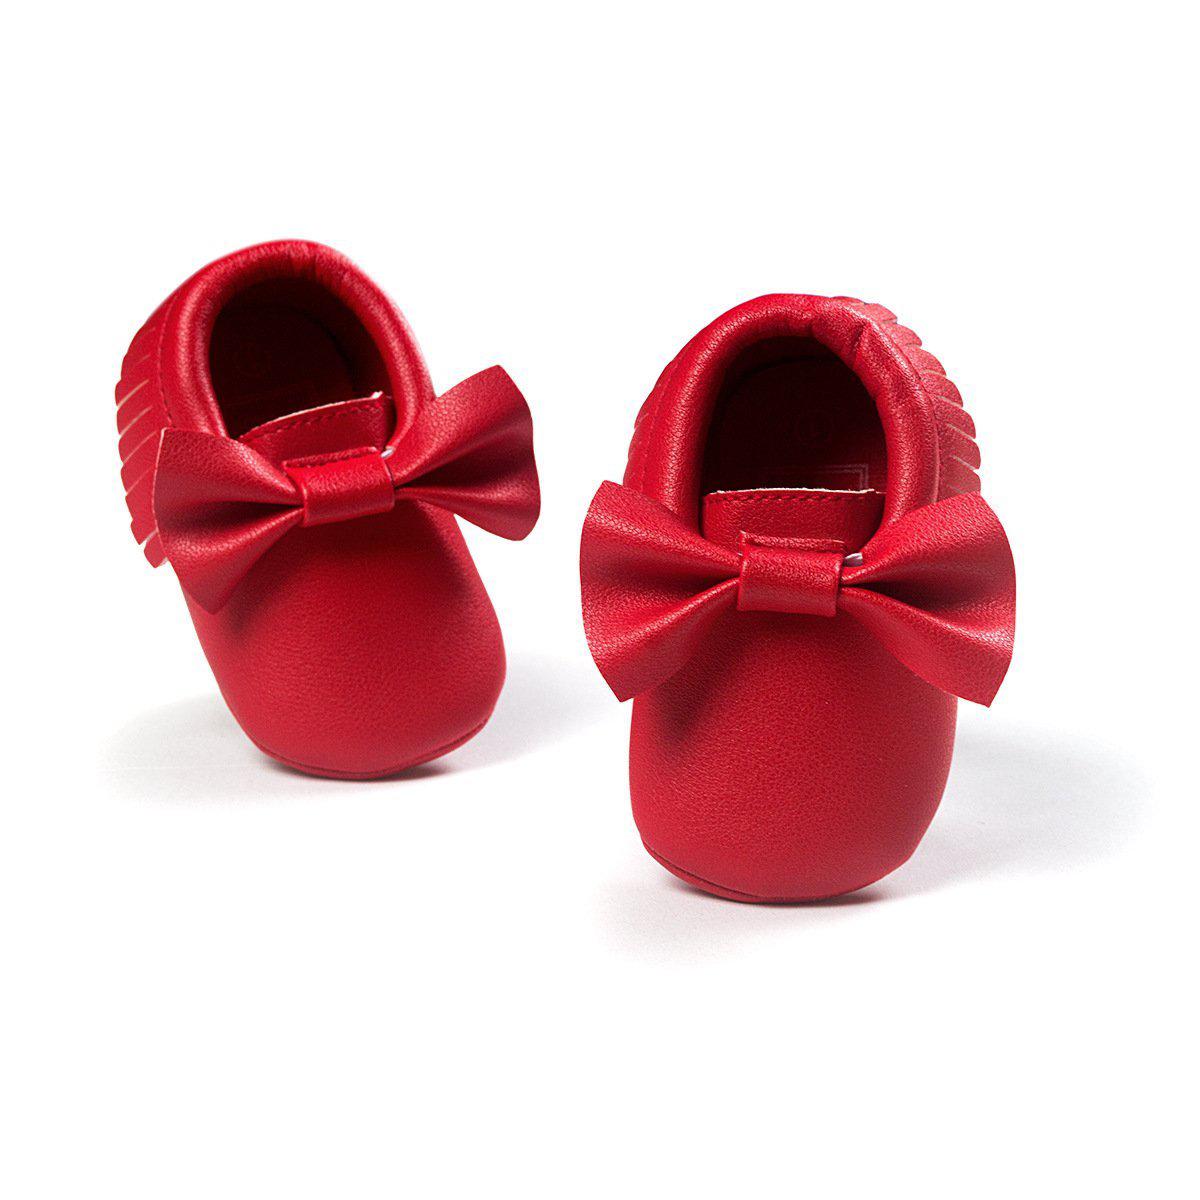 Baby Simple Bowknot Shoes pawlulu